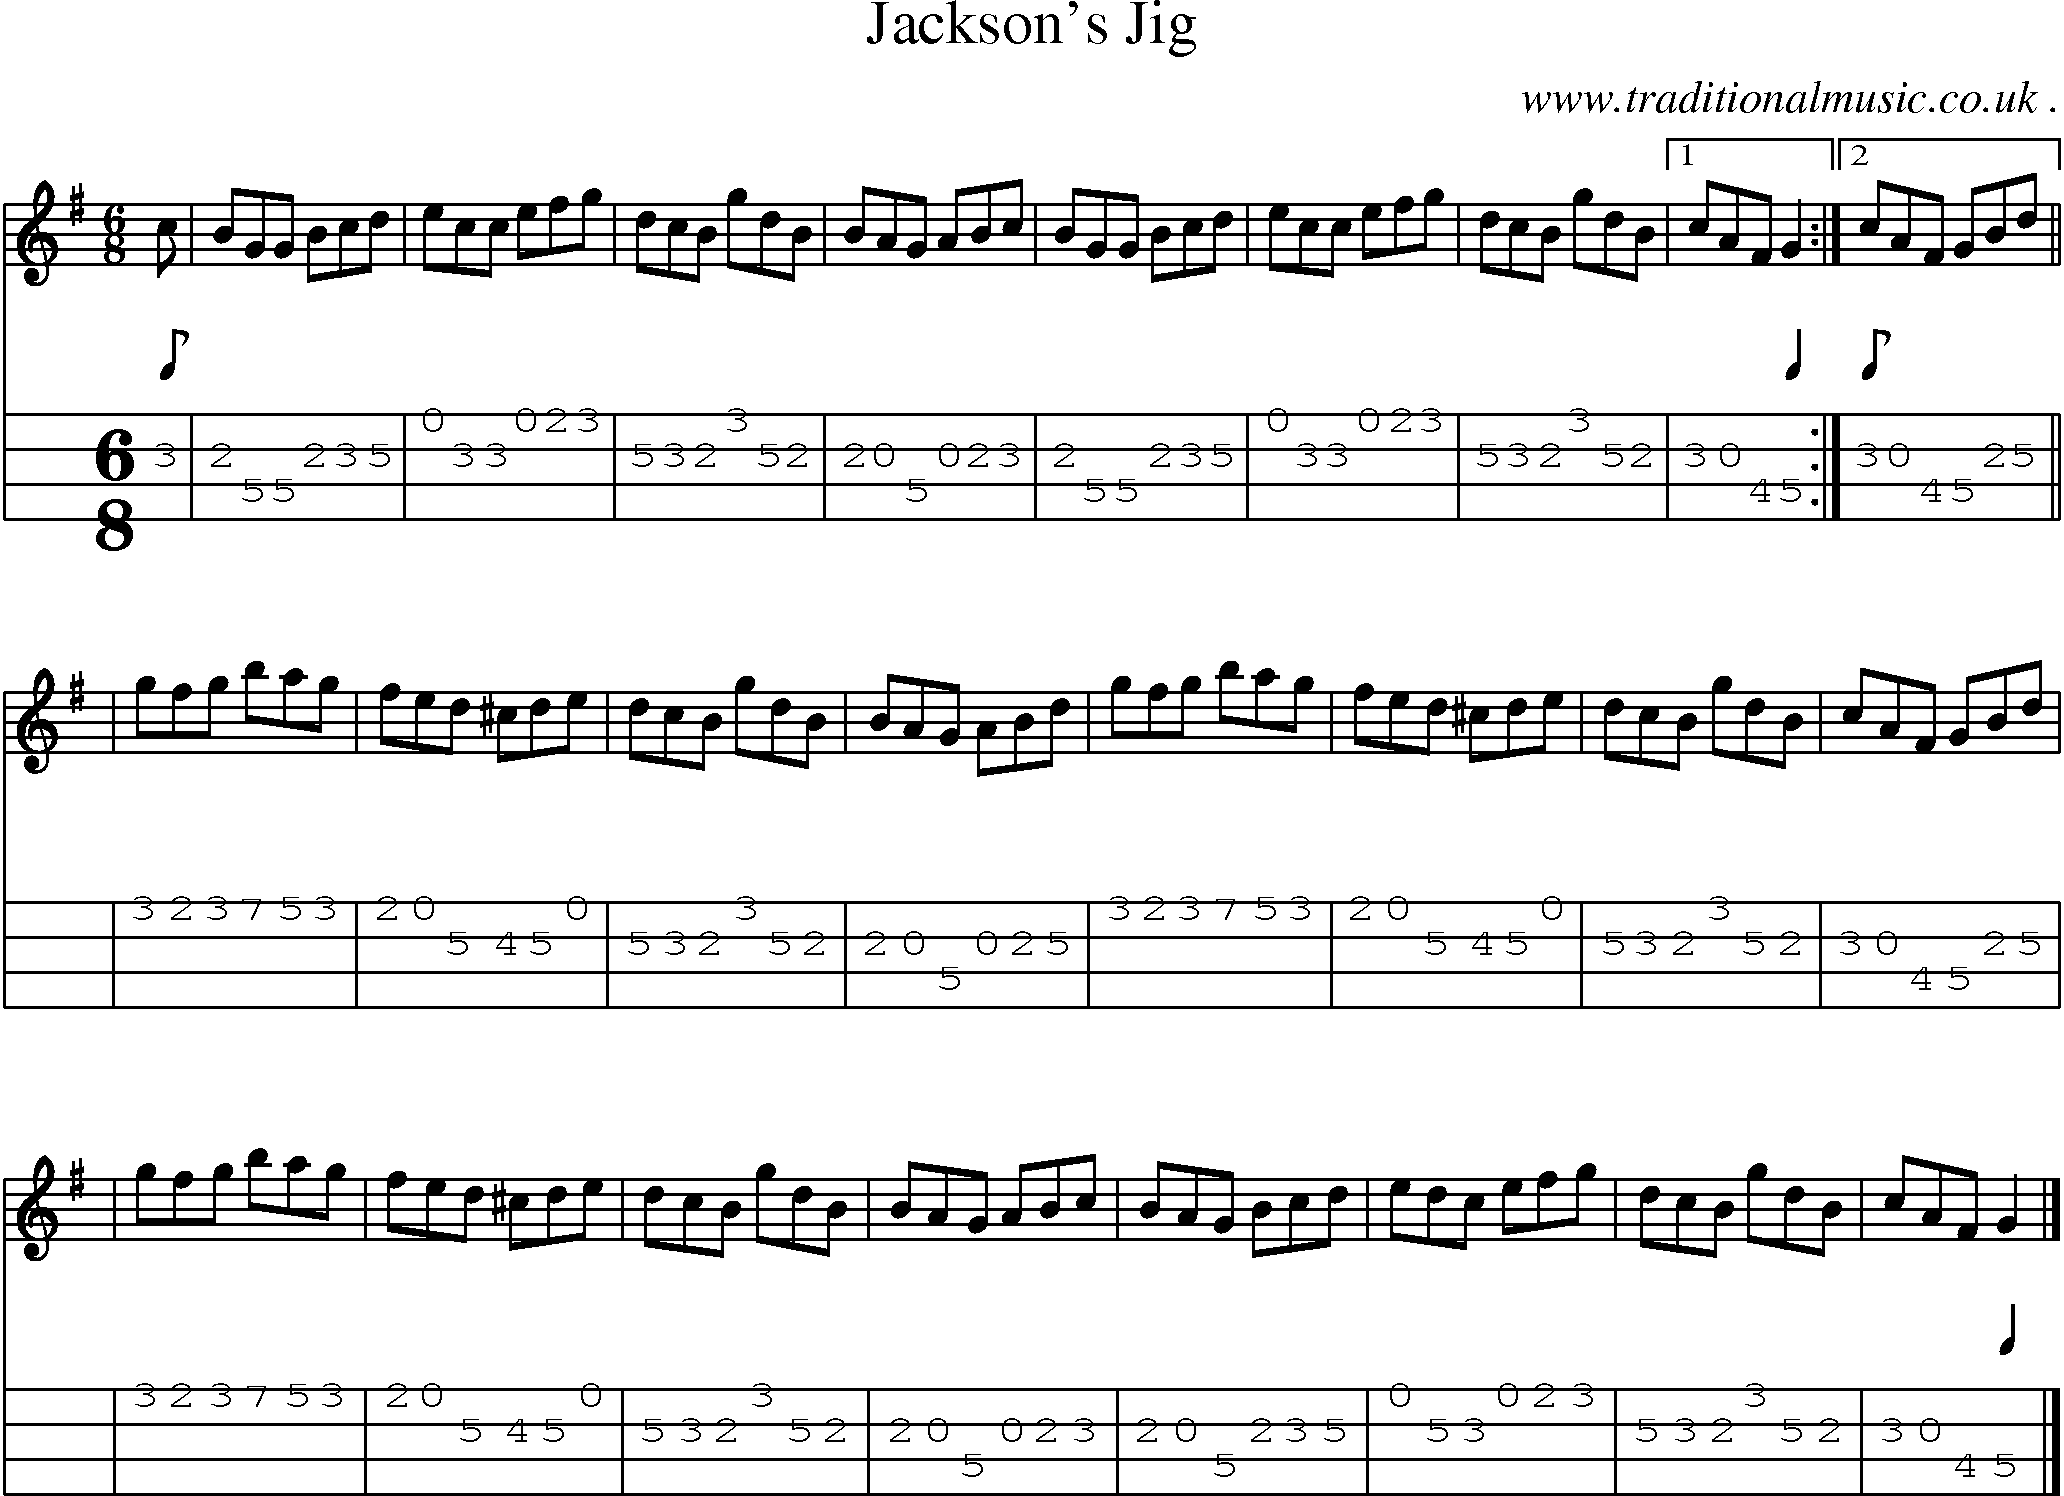 Sheet-music  score, Chords and Mandolin Tabs for Jacksons Jig